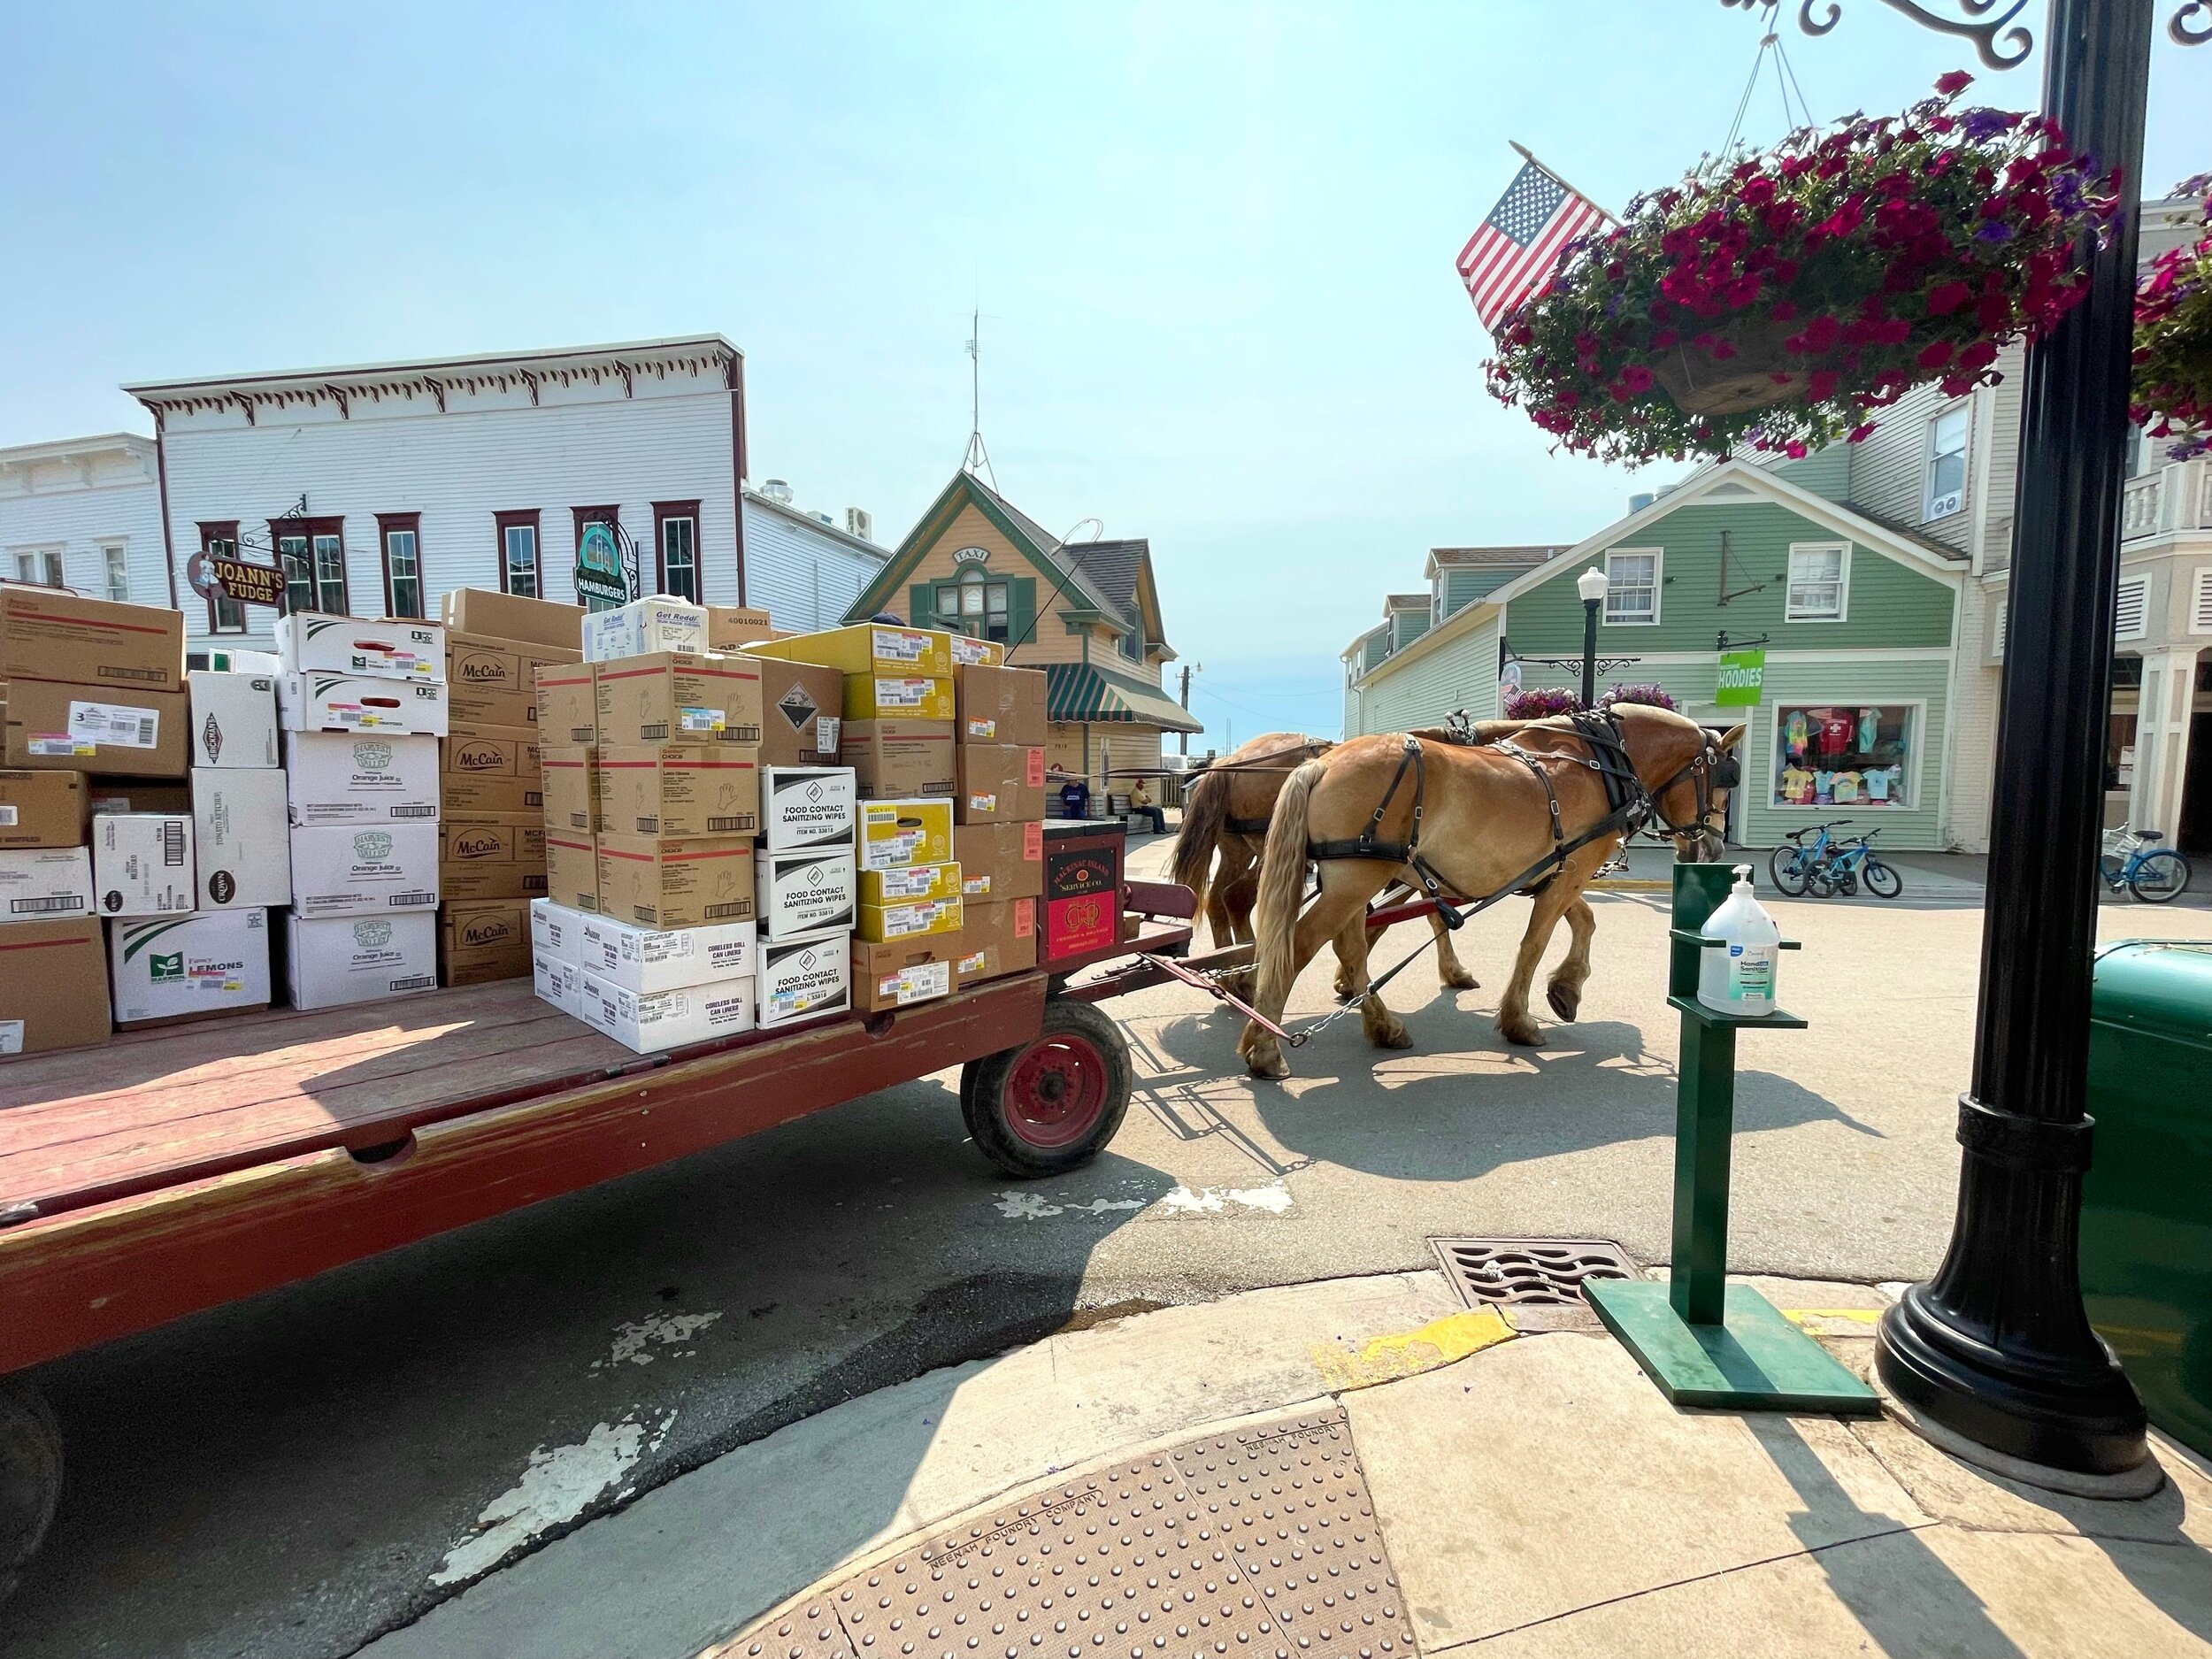  Horses and bicycles are the only public transportation allowed on Mackinac. A shipment of merchandise and supplies to the local shops and restaurants also arrive by horse-pulled carts.  